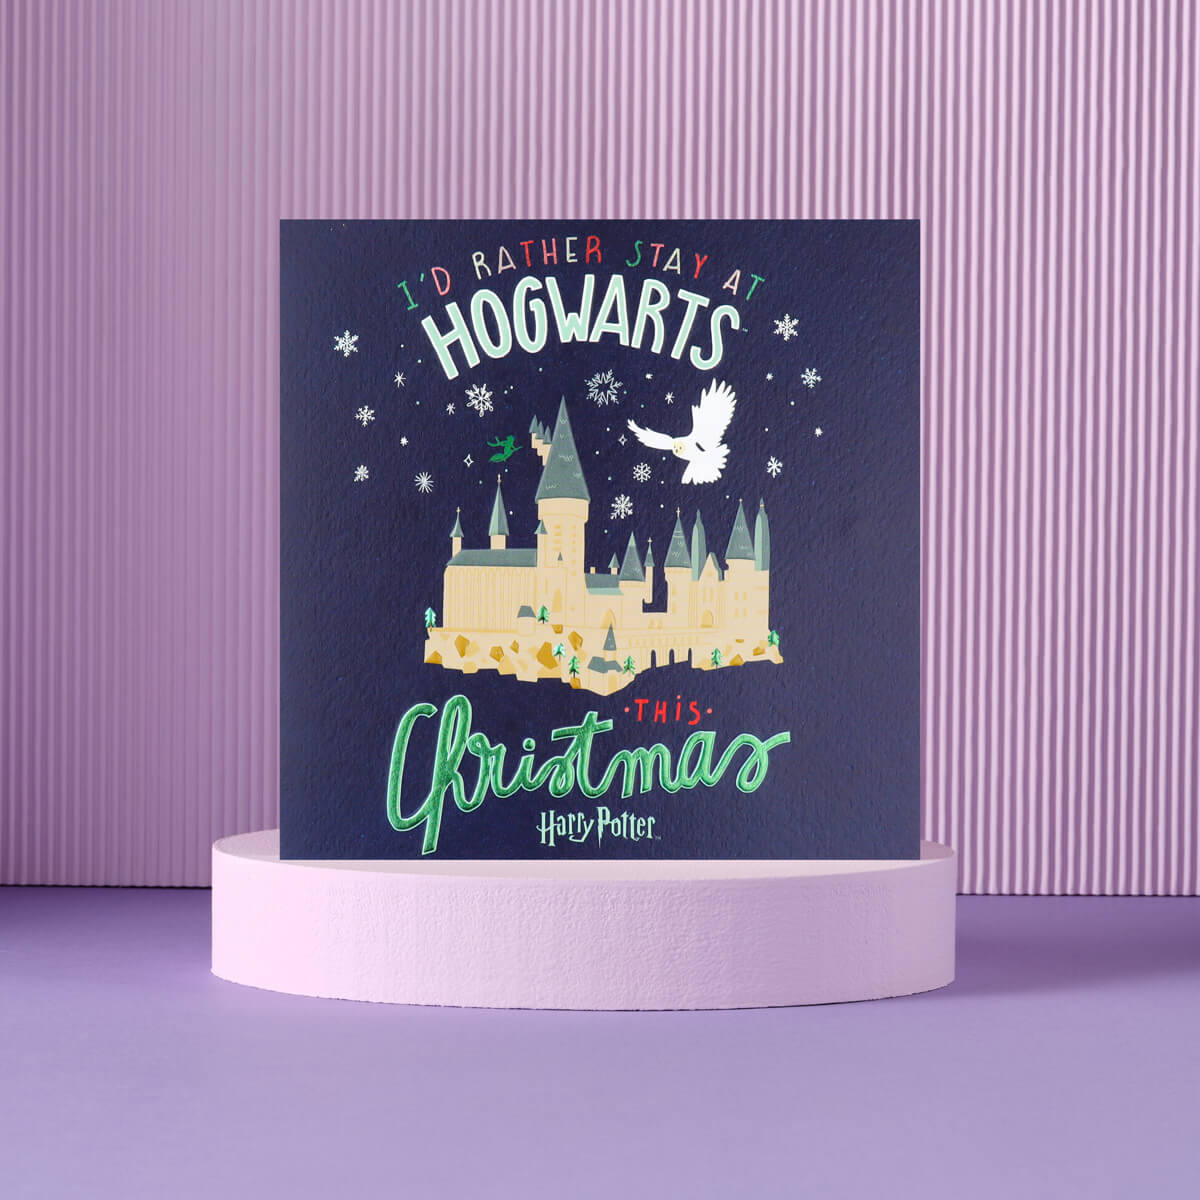 Blue Harry Potter Christmas Card which reads 'I'd Rather Stay At Hogwarts This Christmas'